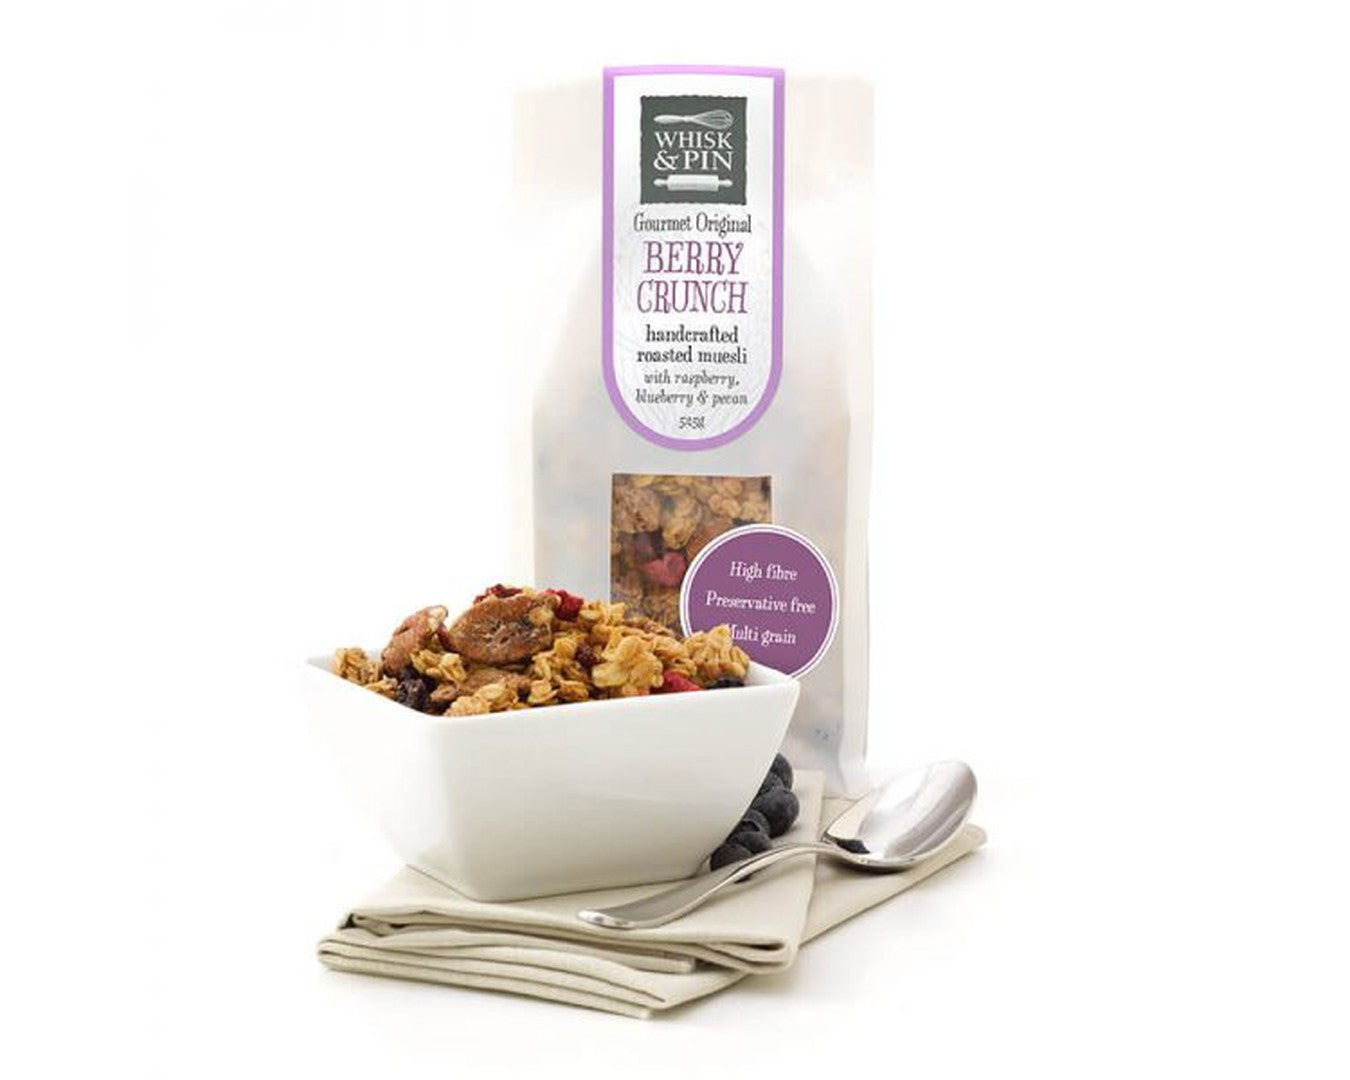 Whisk & Pin Berry Crunch Muesli 525g-Cereal-The Local Basket